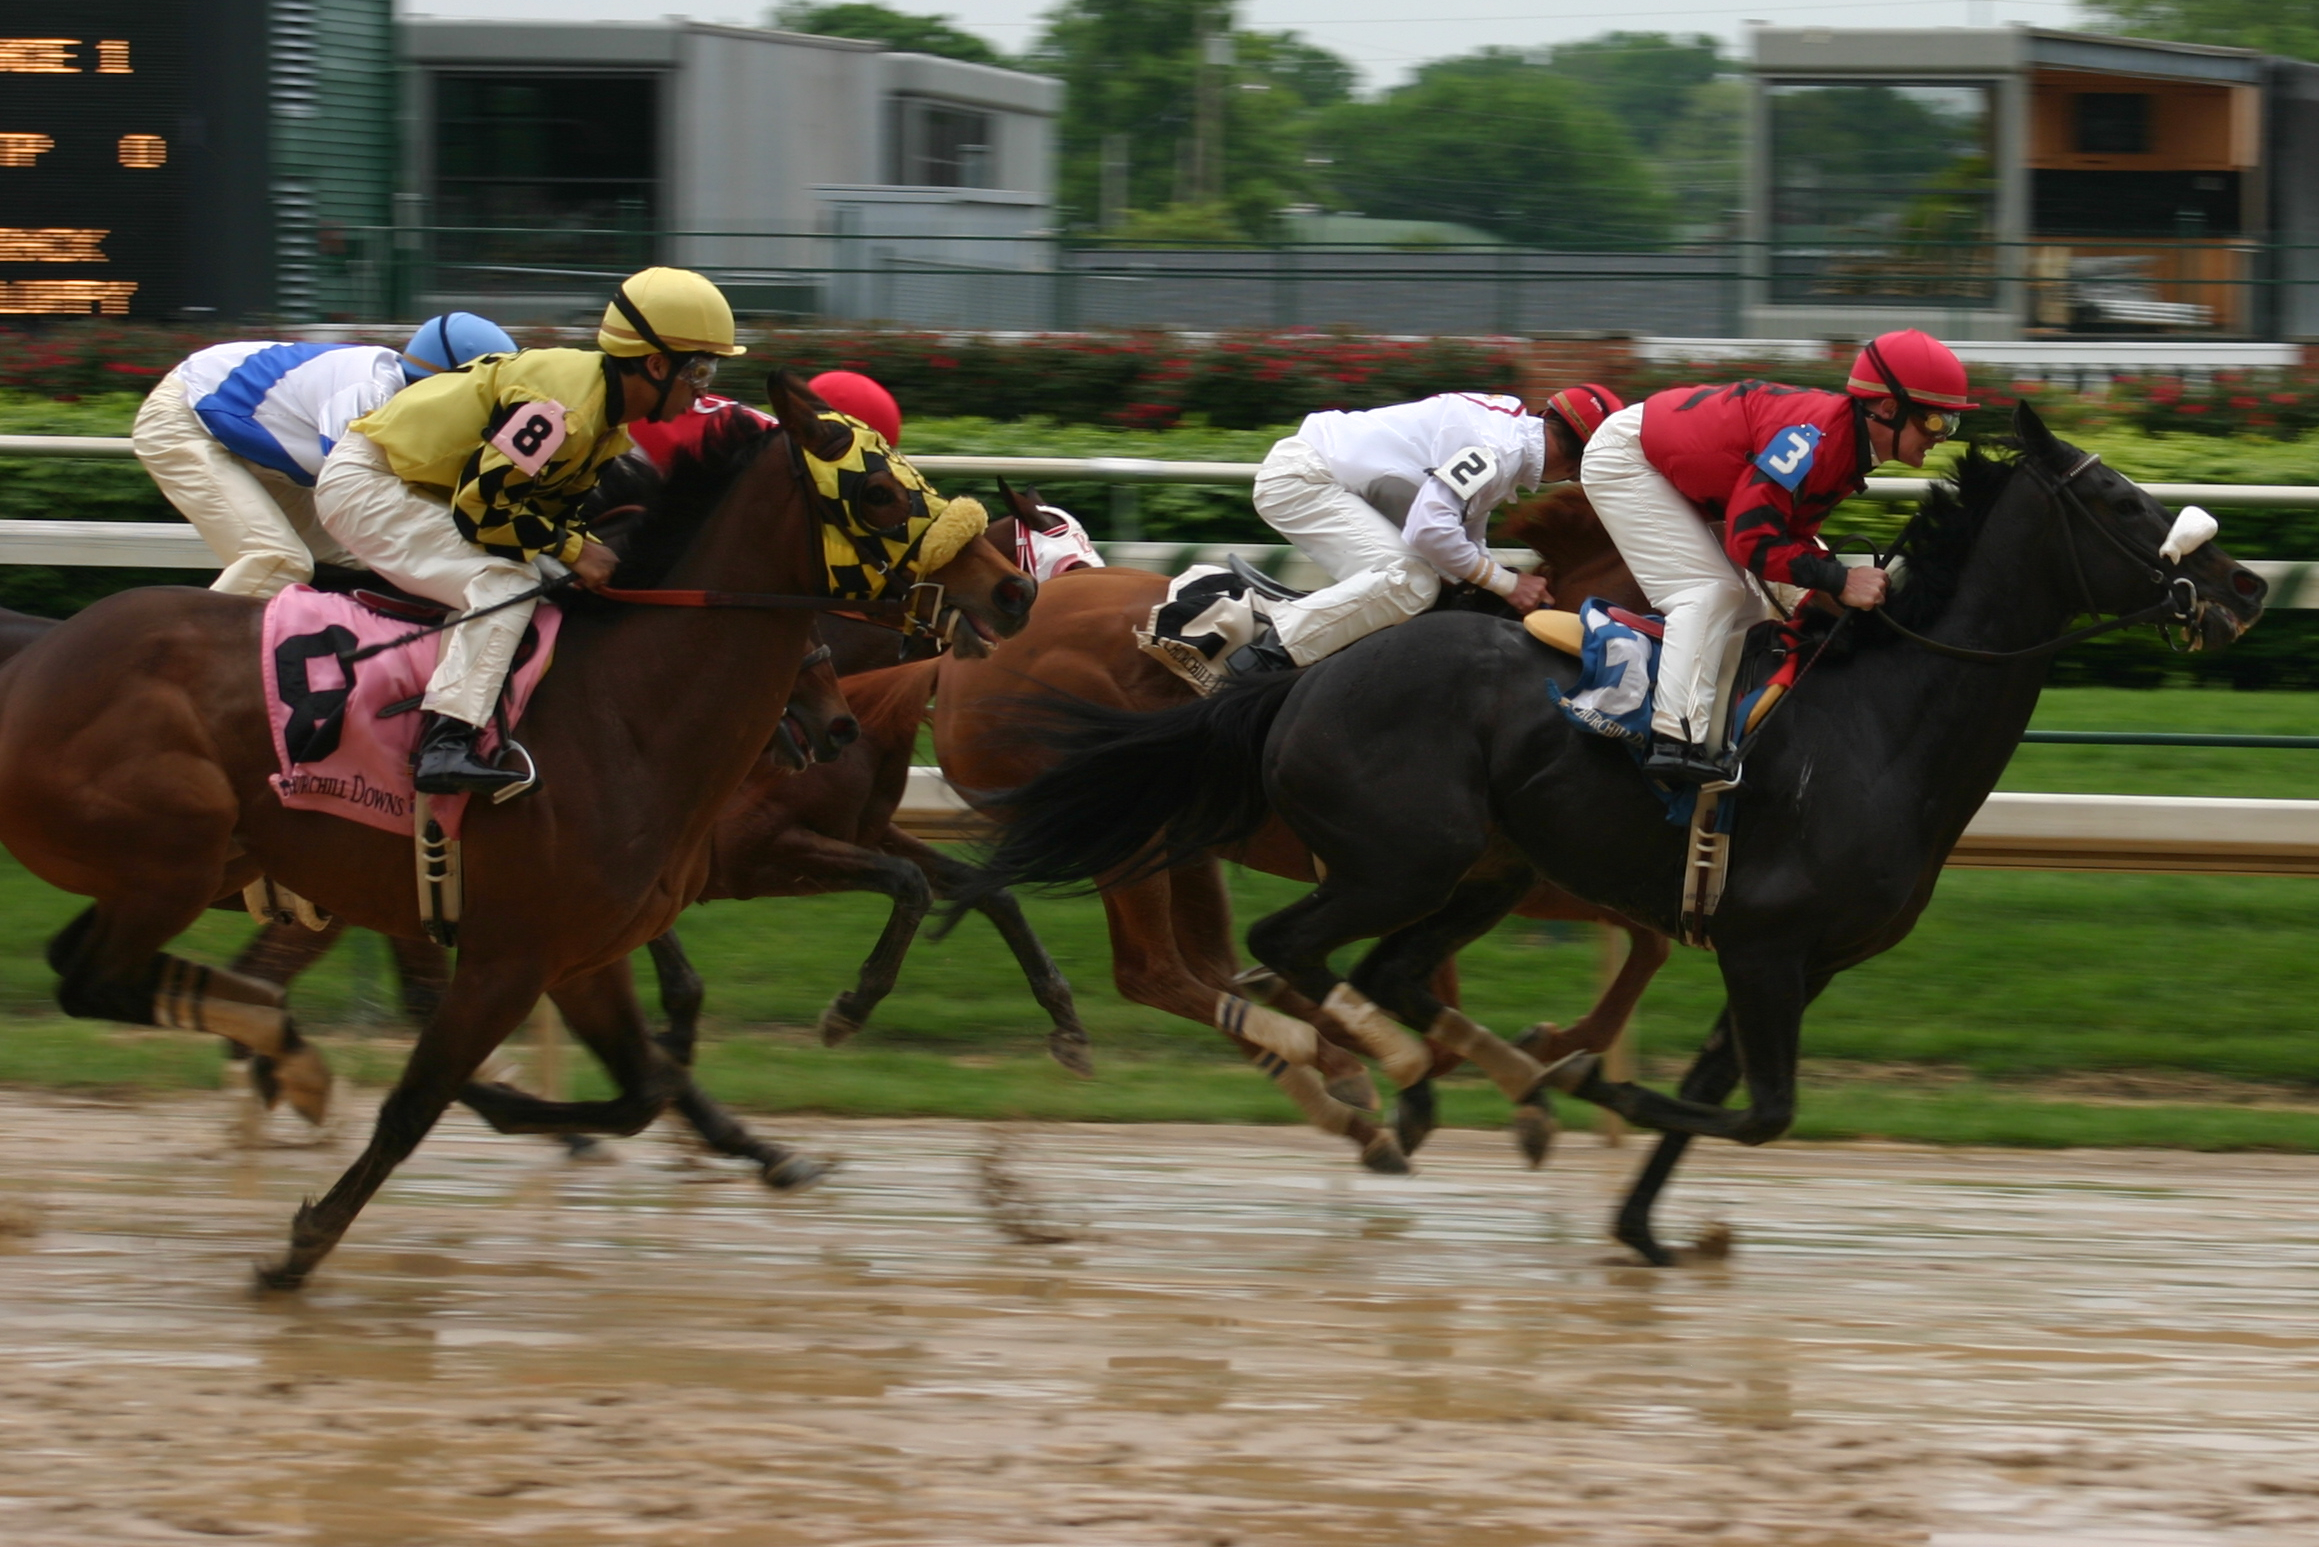 7 Interesting Facts About Horse Racing